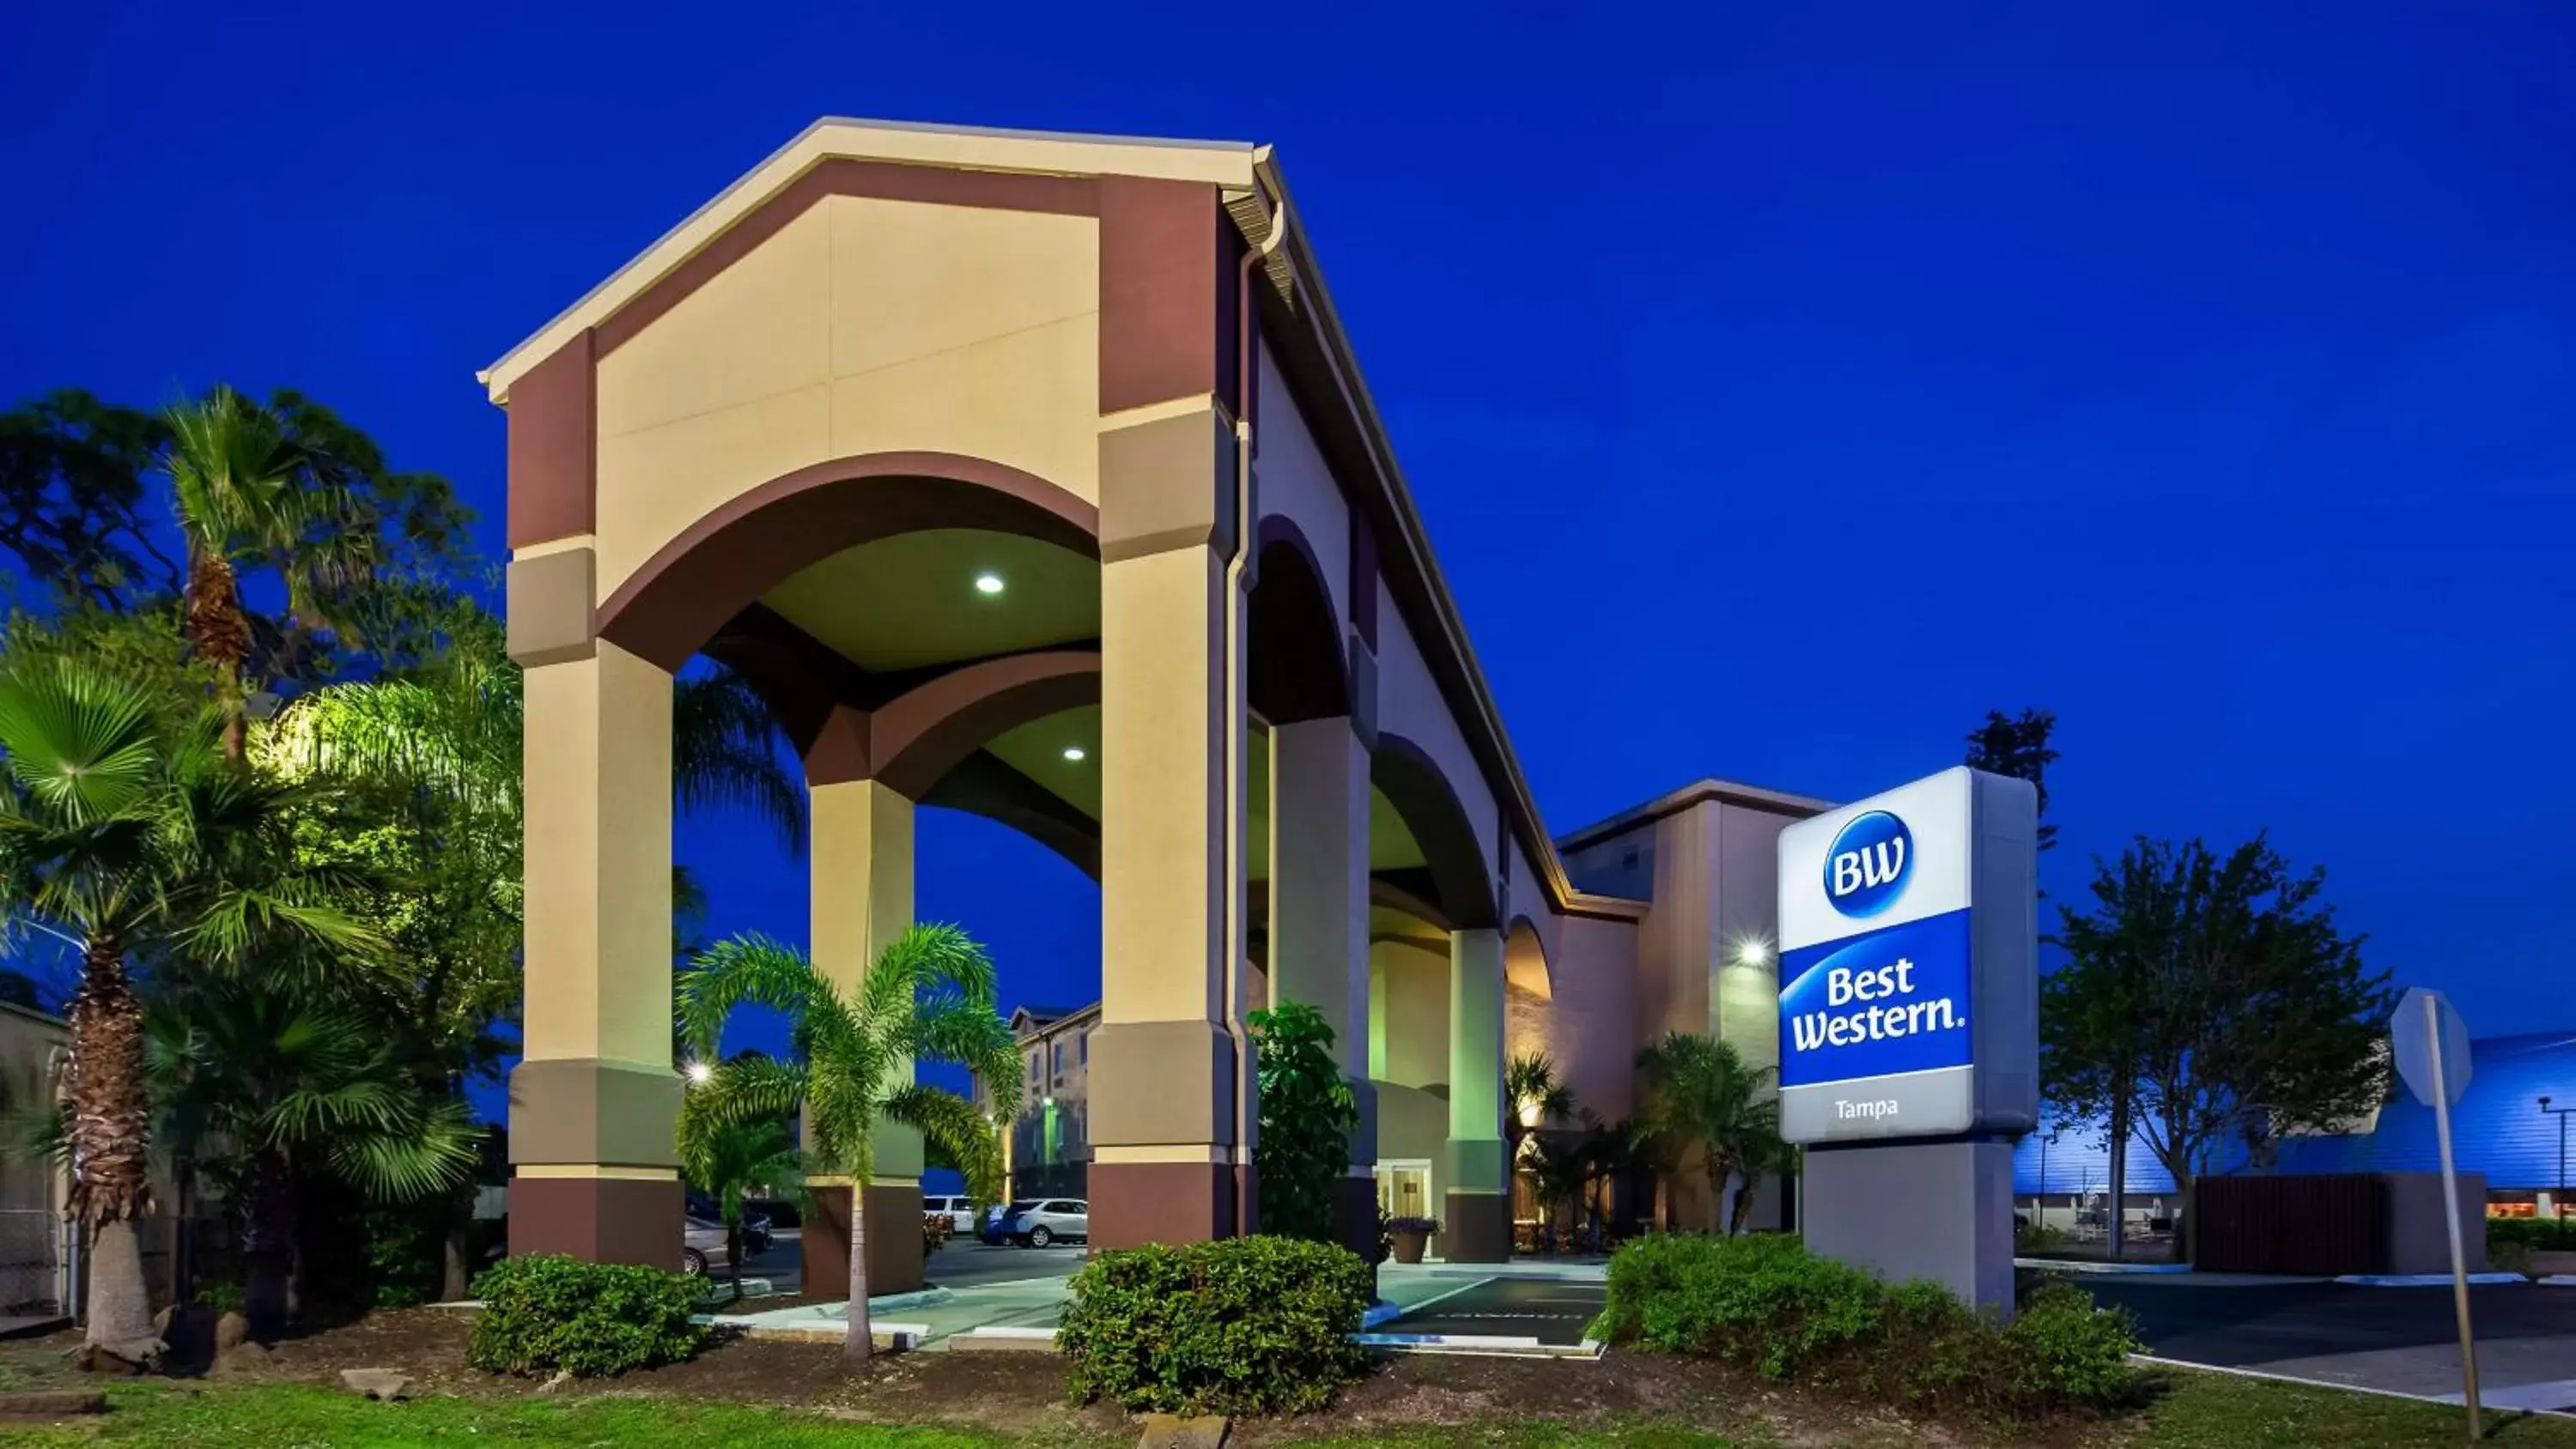 Property building in Best Western Tampa